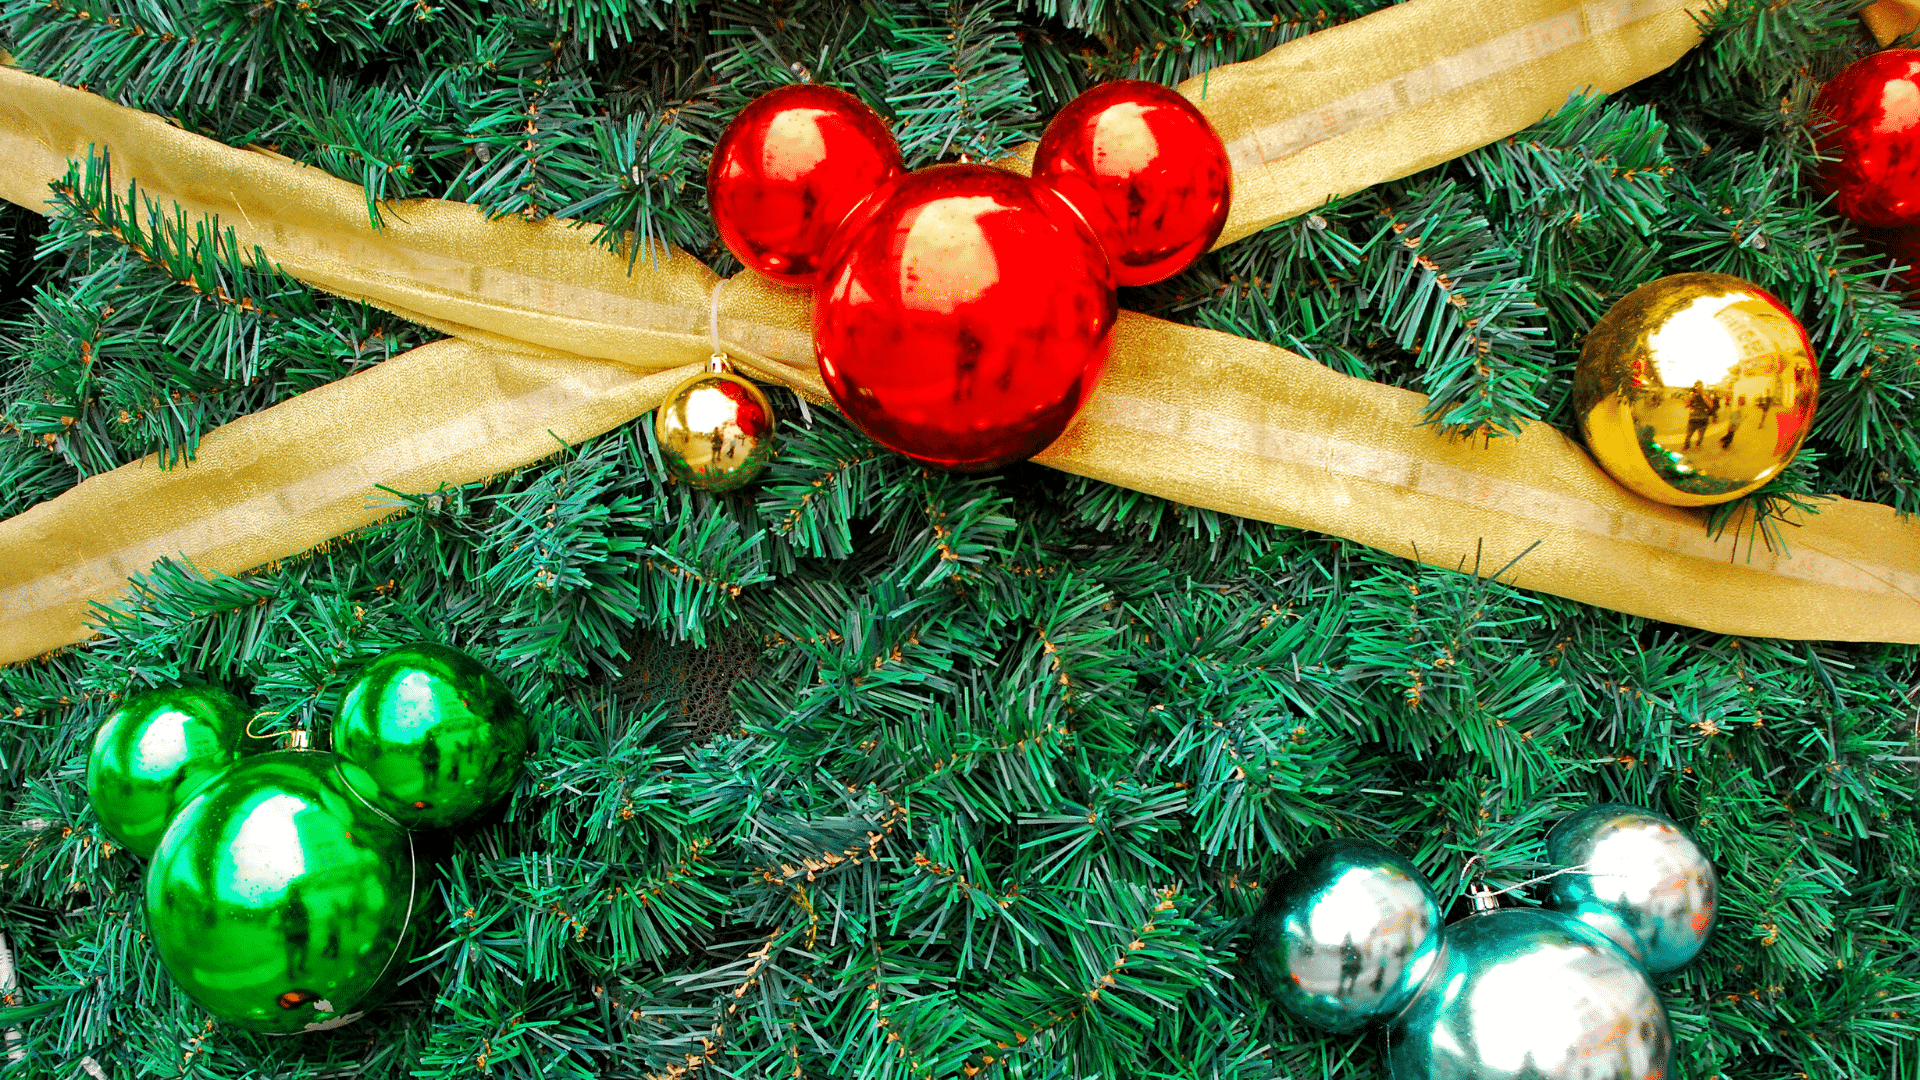 Mickey Mouse Ornaments for Christmas Tree